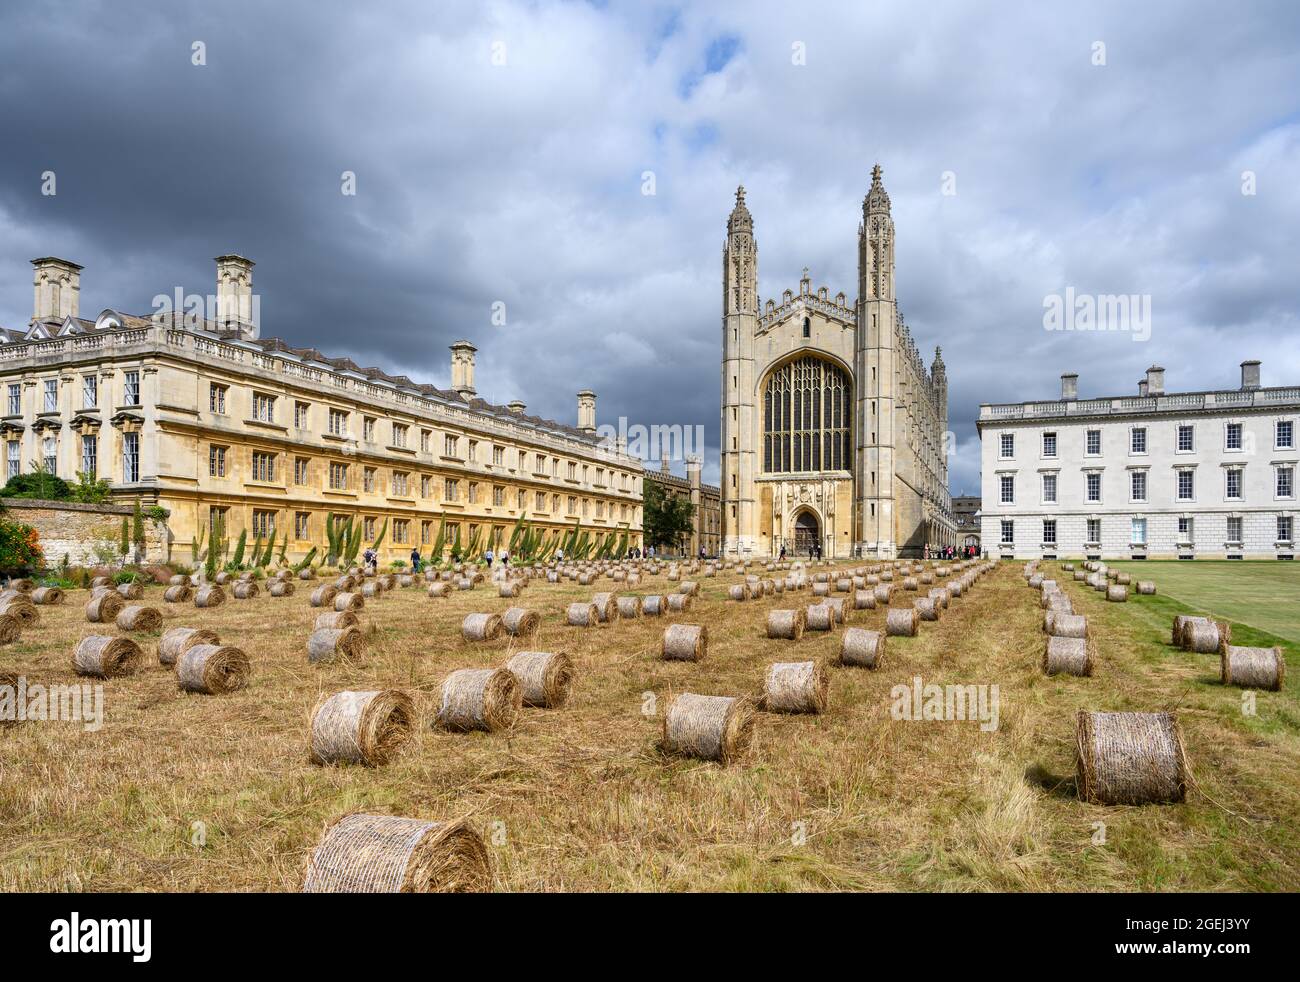 King's College Chapel, with Clare College to the left, King's College, Cambridge, Cambridgeshire, England, UK Stock Photo